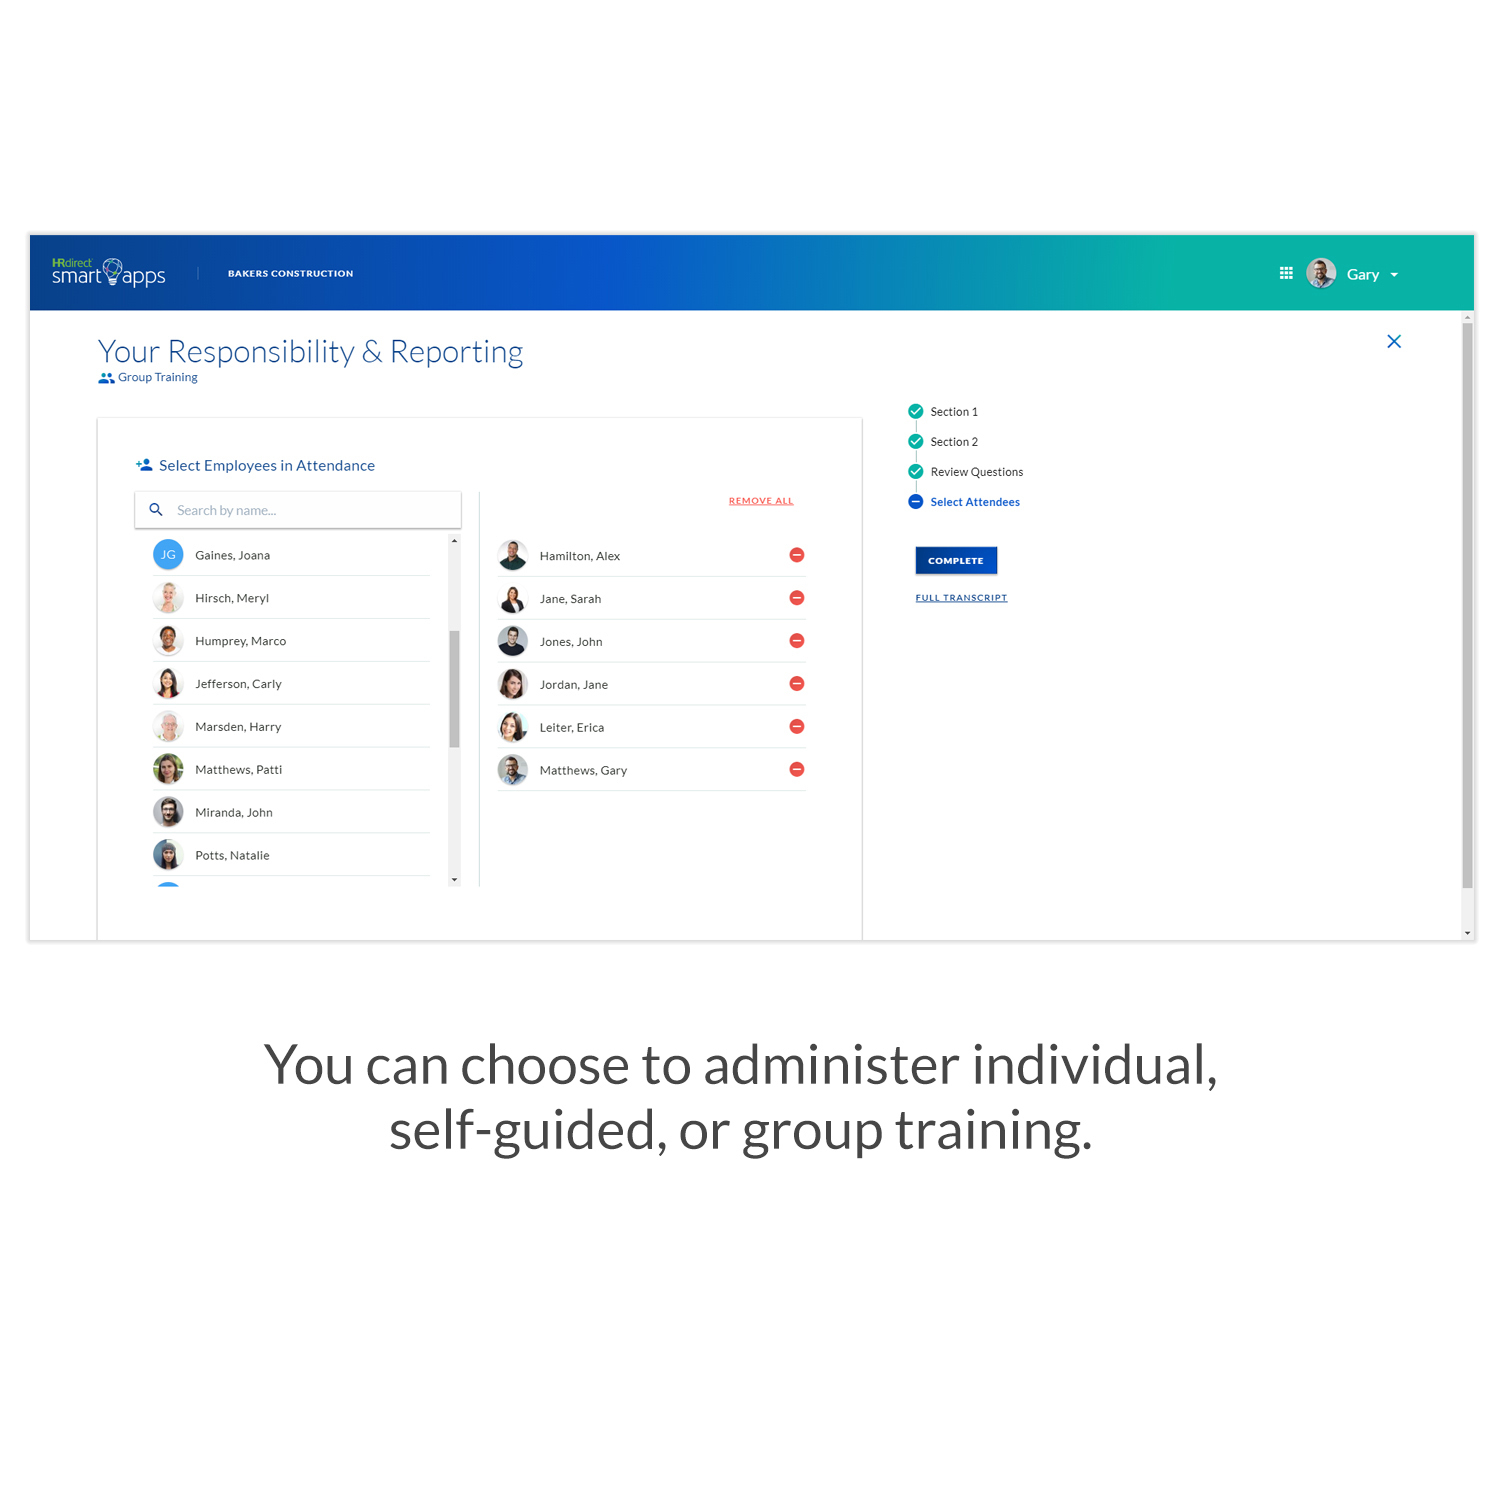 Employee Safety Training Software